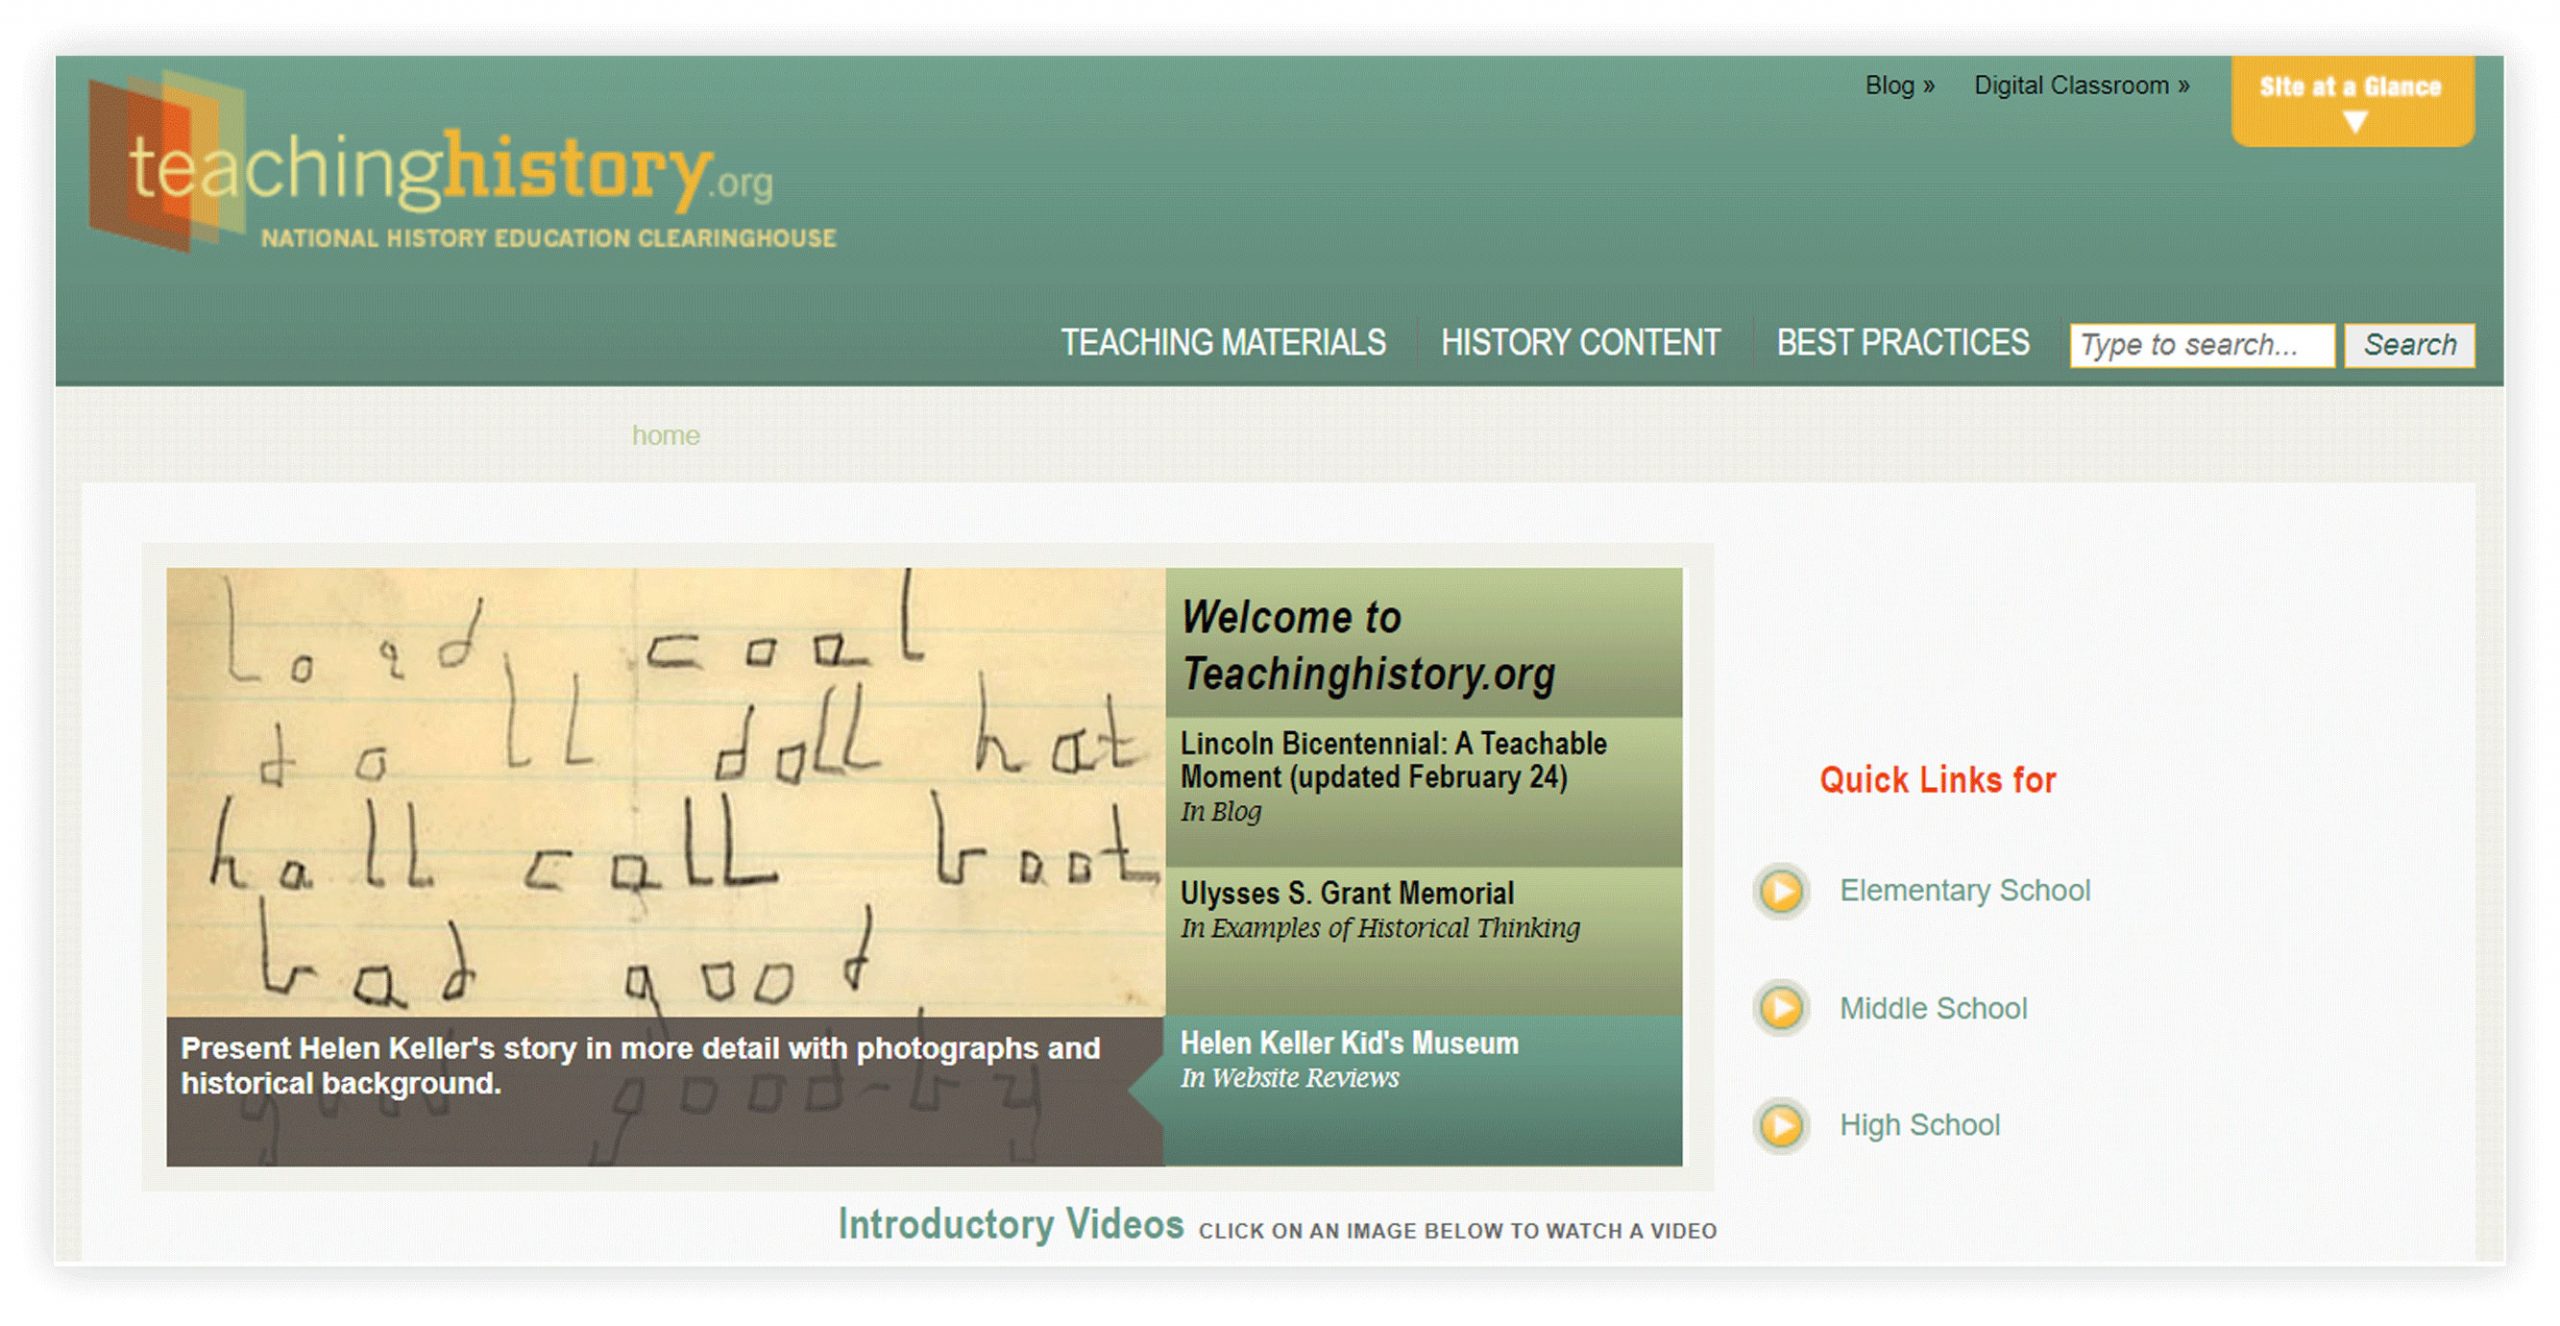 Screengrab of the TeachingHistory.org website home page.